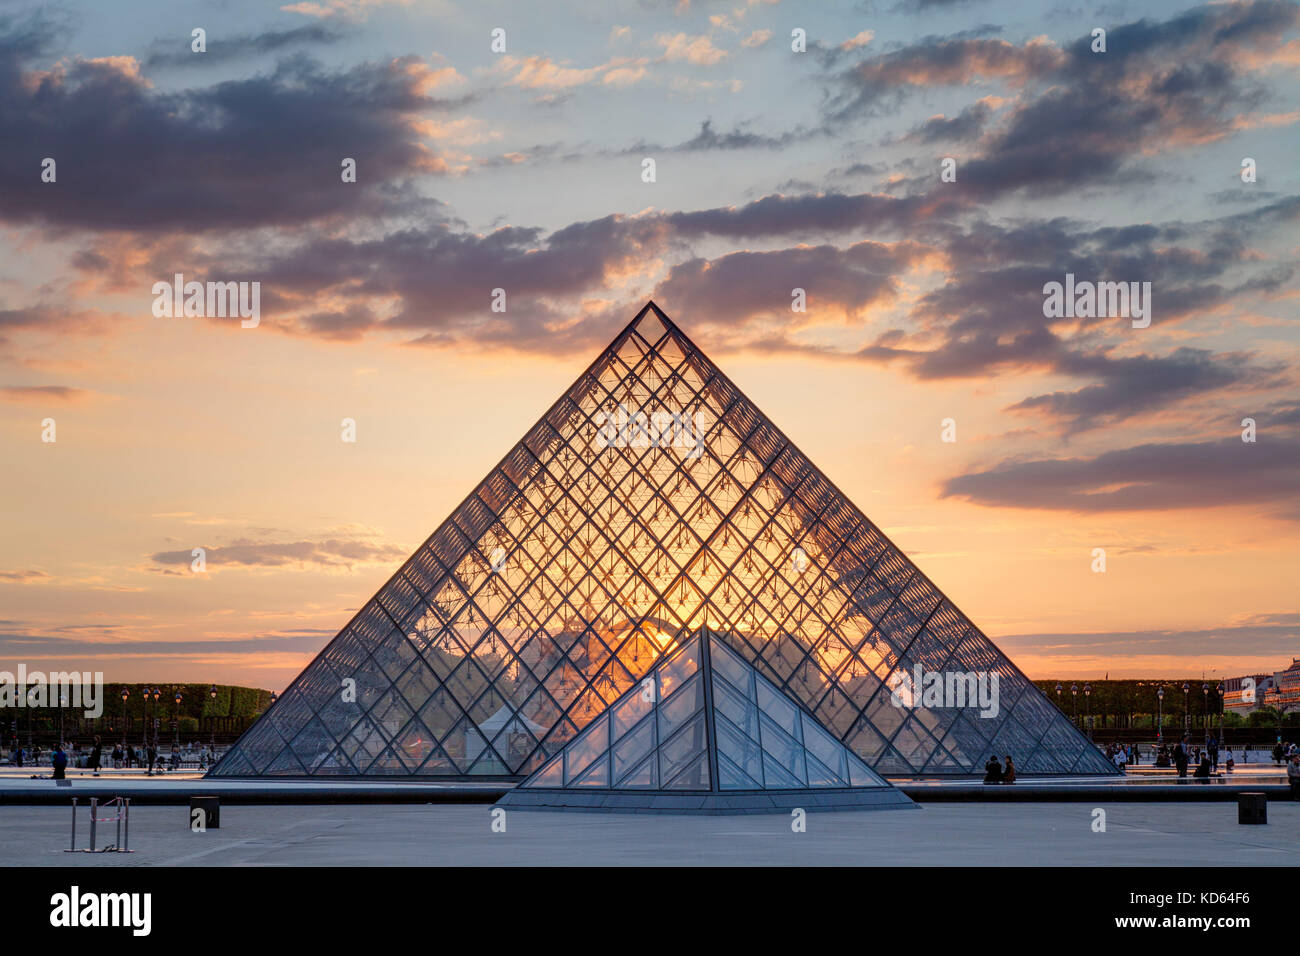 Paris (France): the Louvre Pyramid, a large glass and metal pyramid at the entrance to the museum, designed by architect I.M. Pei, here lit up at nigh Stock Photo